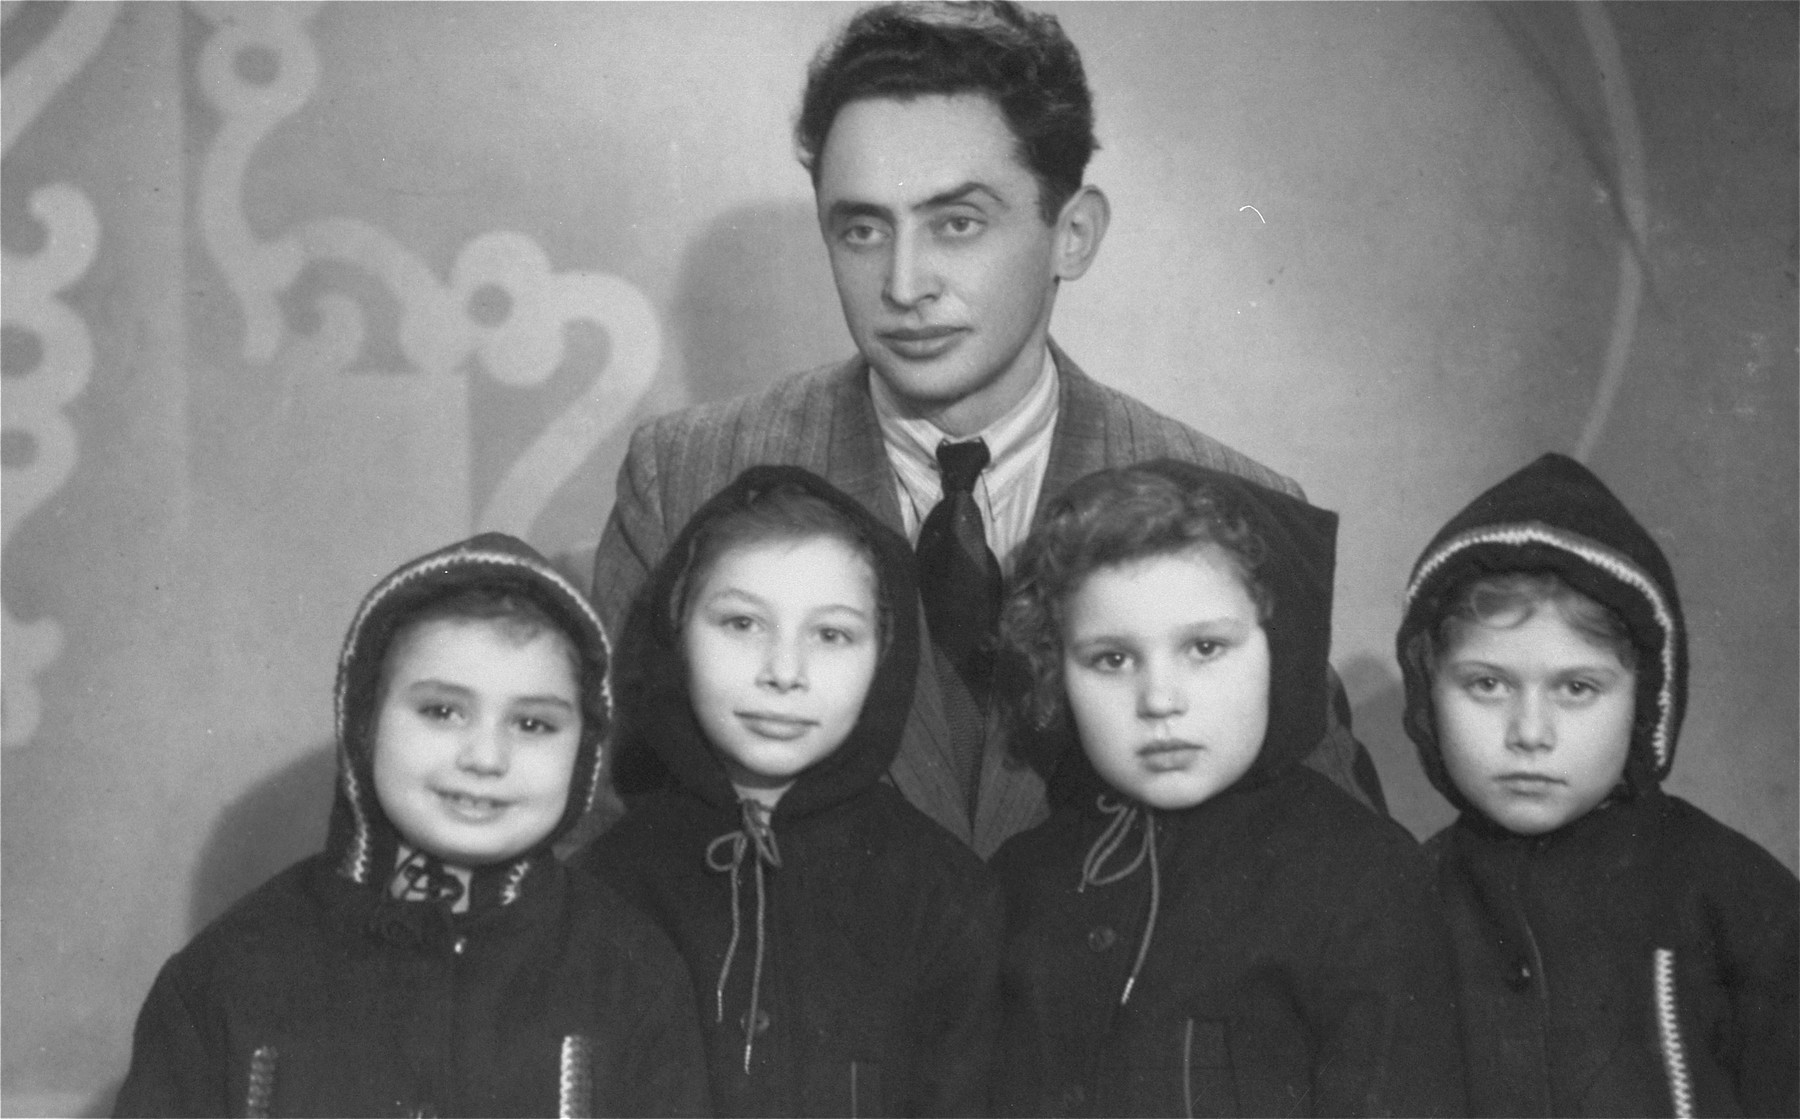 Jehuda Bornstein poses with four Jewish girls he retrieved from hiding and placed in a children's home on Narutowicza Street in Lodz. 

Pictured from left to right are: Halinka, who was hidden as Zinaida Bar in Legnica, Poland by a Christian woman whose name was Ostrowska; Wandeczka, now known as Tamy Lavee, who had been hidden by a Christian woman; Basia David, who was hidden in Orlovo by the Polubinska family who treated Basia so well that she didn't want to leave them; and Sabina (Inka) Kagan, hidden by the Roztropowicz family in Nidzica.